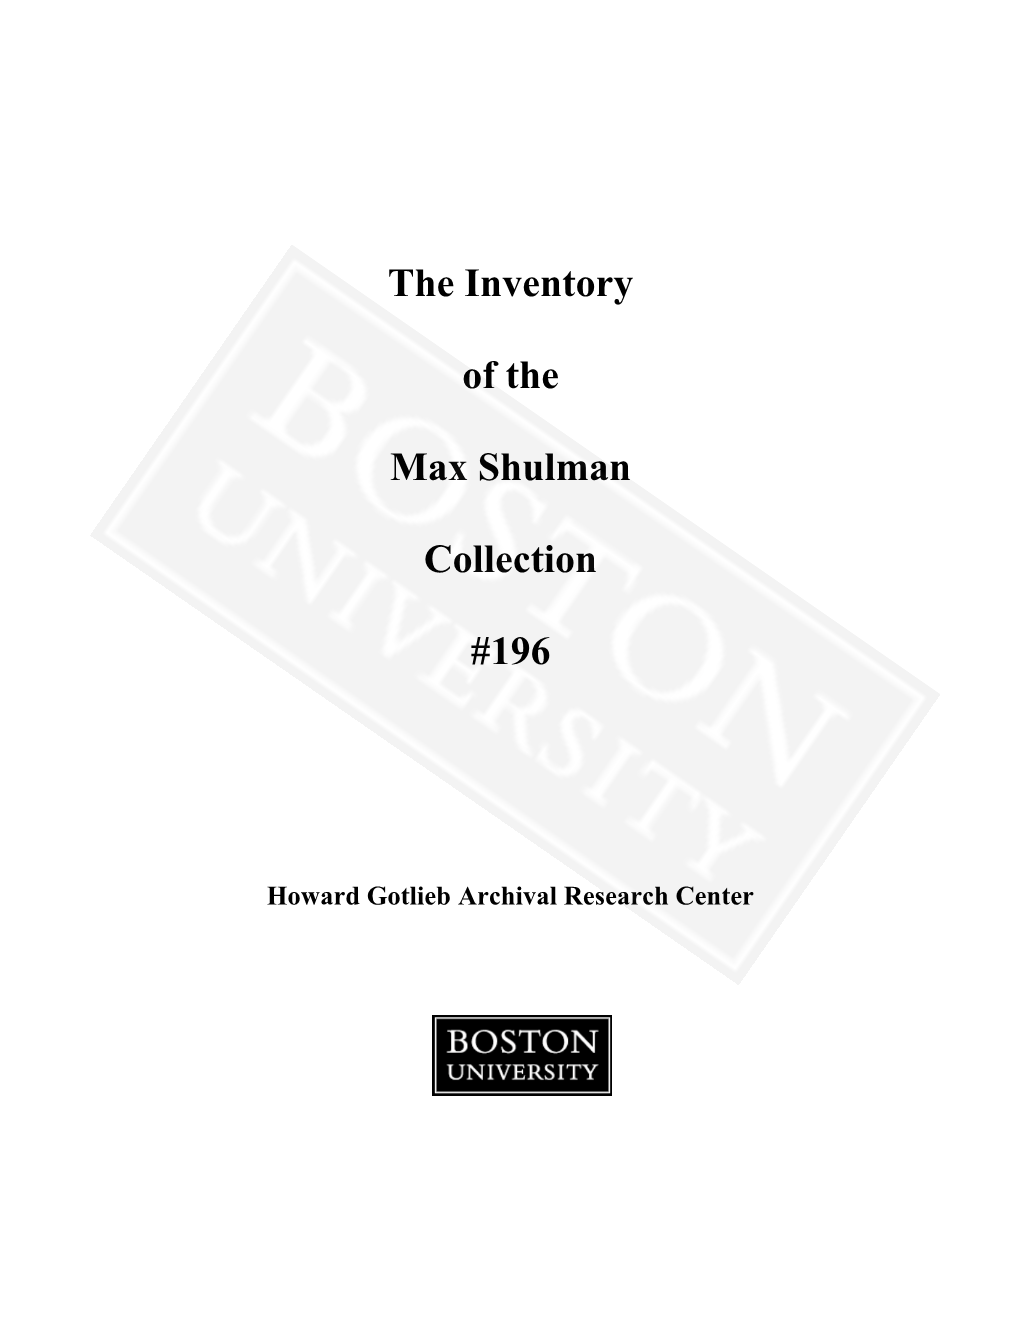 The Inventory of the Max Shulman Collection #196